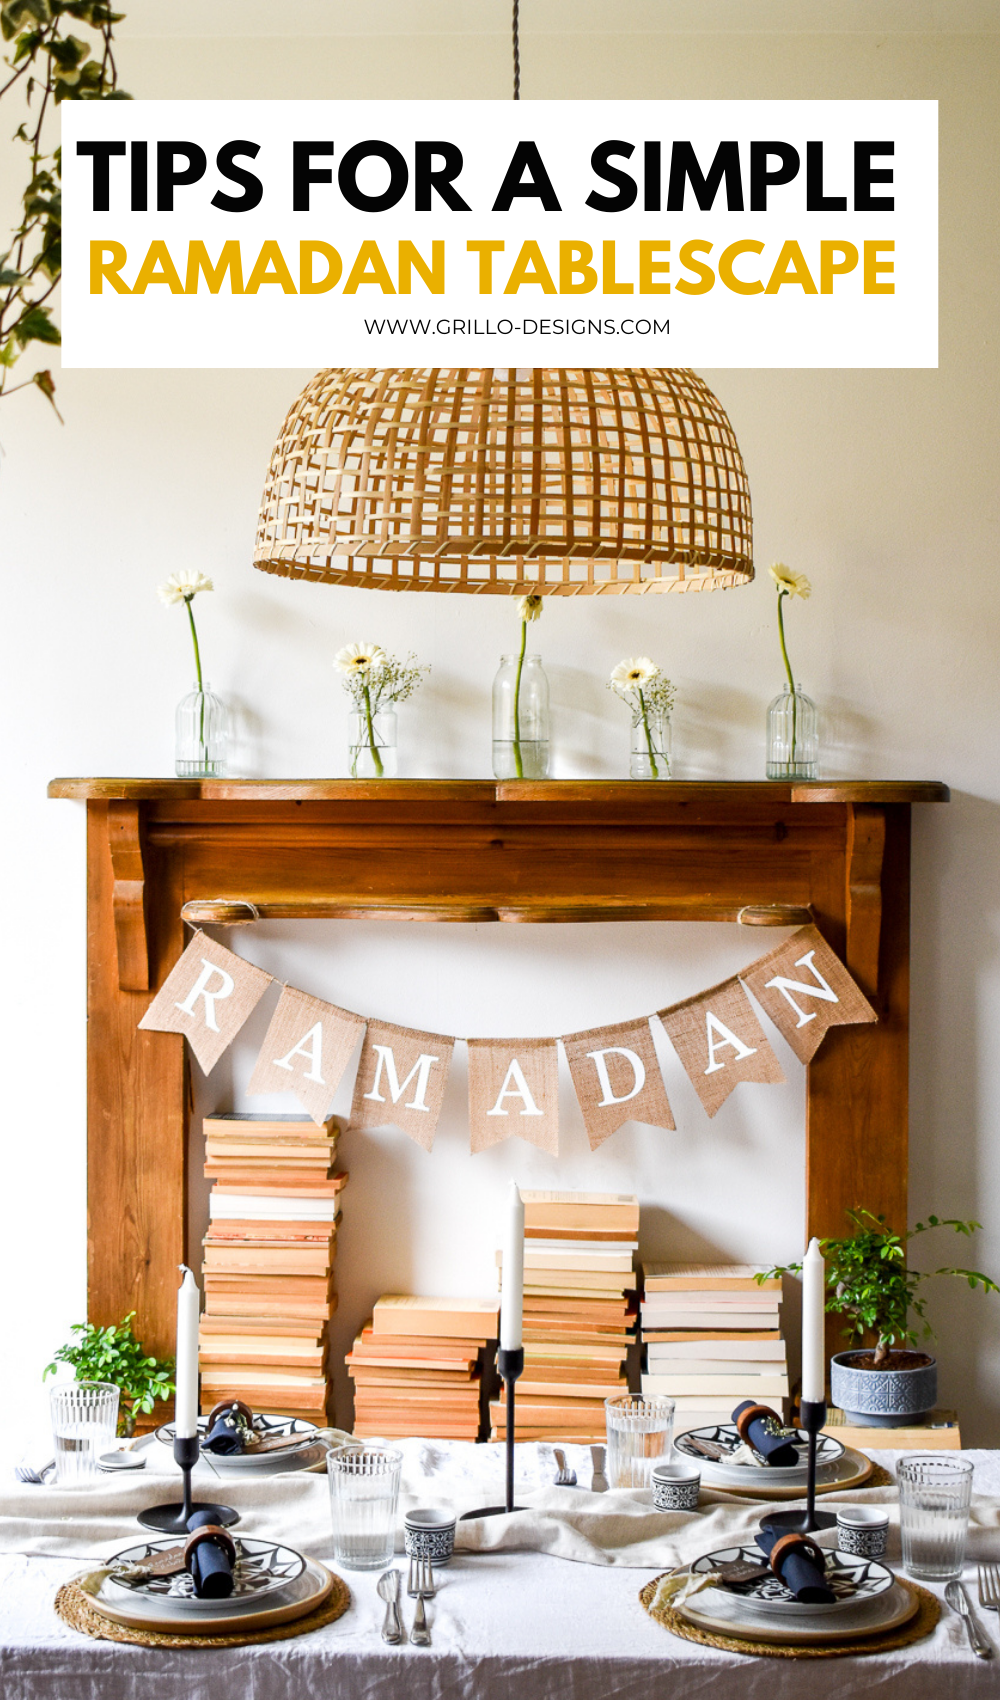 Ramadan tablescape with faux mantle wall behind it and a Ramadan banner with text overlay "Tips for a simple Ramadan tablescape"